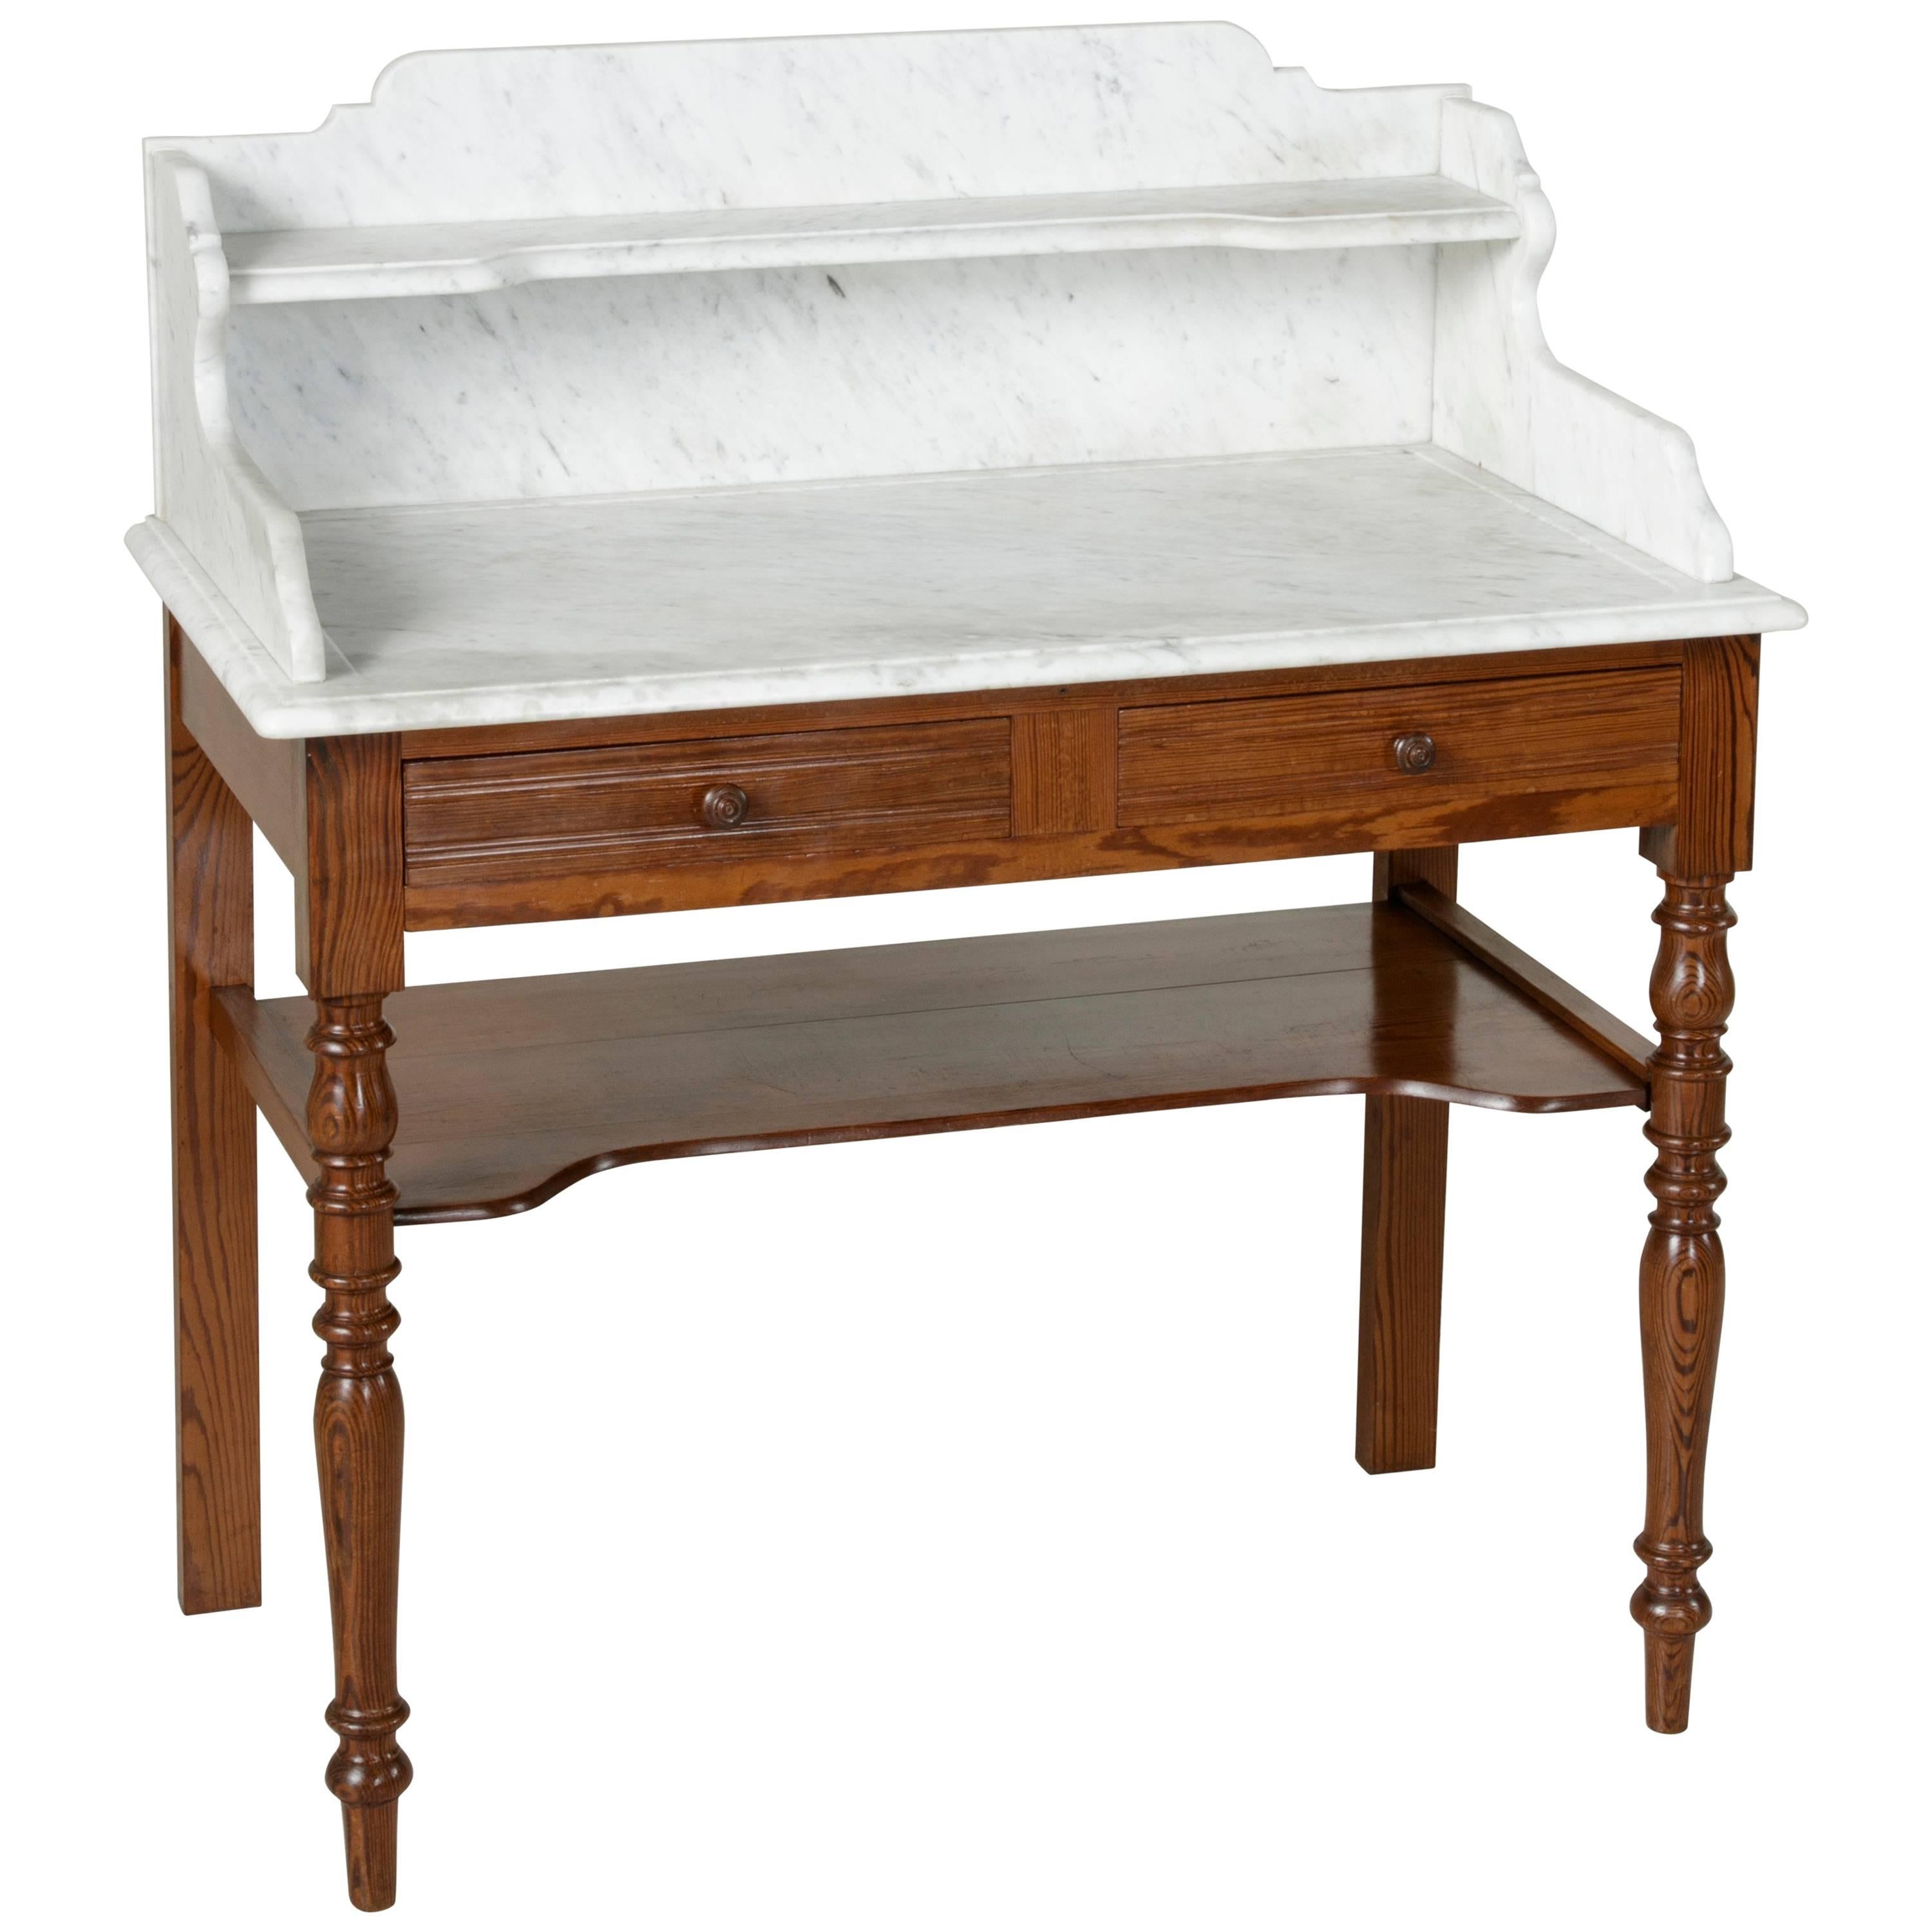 French Pitch Pine Vanity Table Work Table with Carrara Marble Top, circa 1900